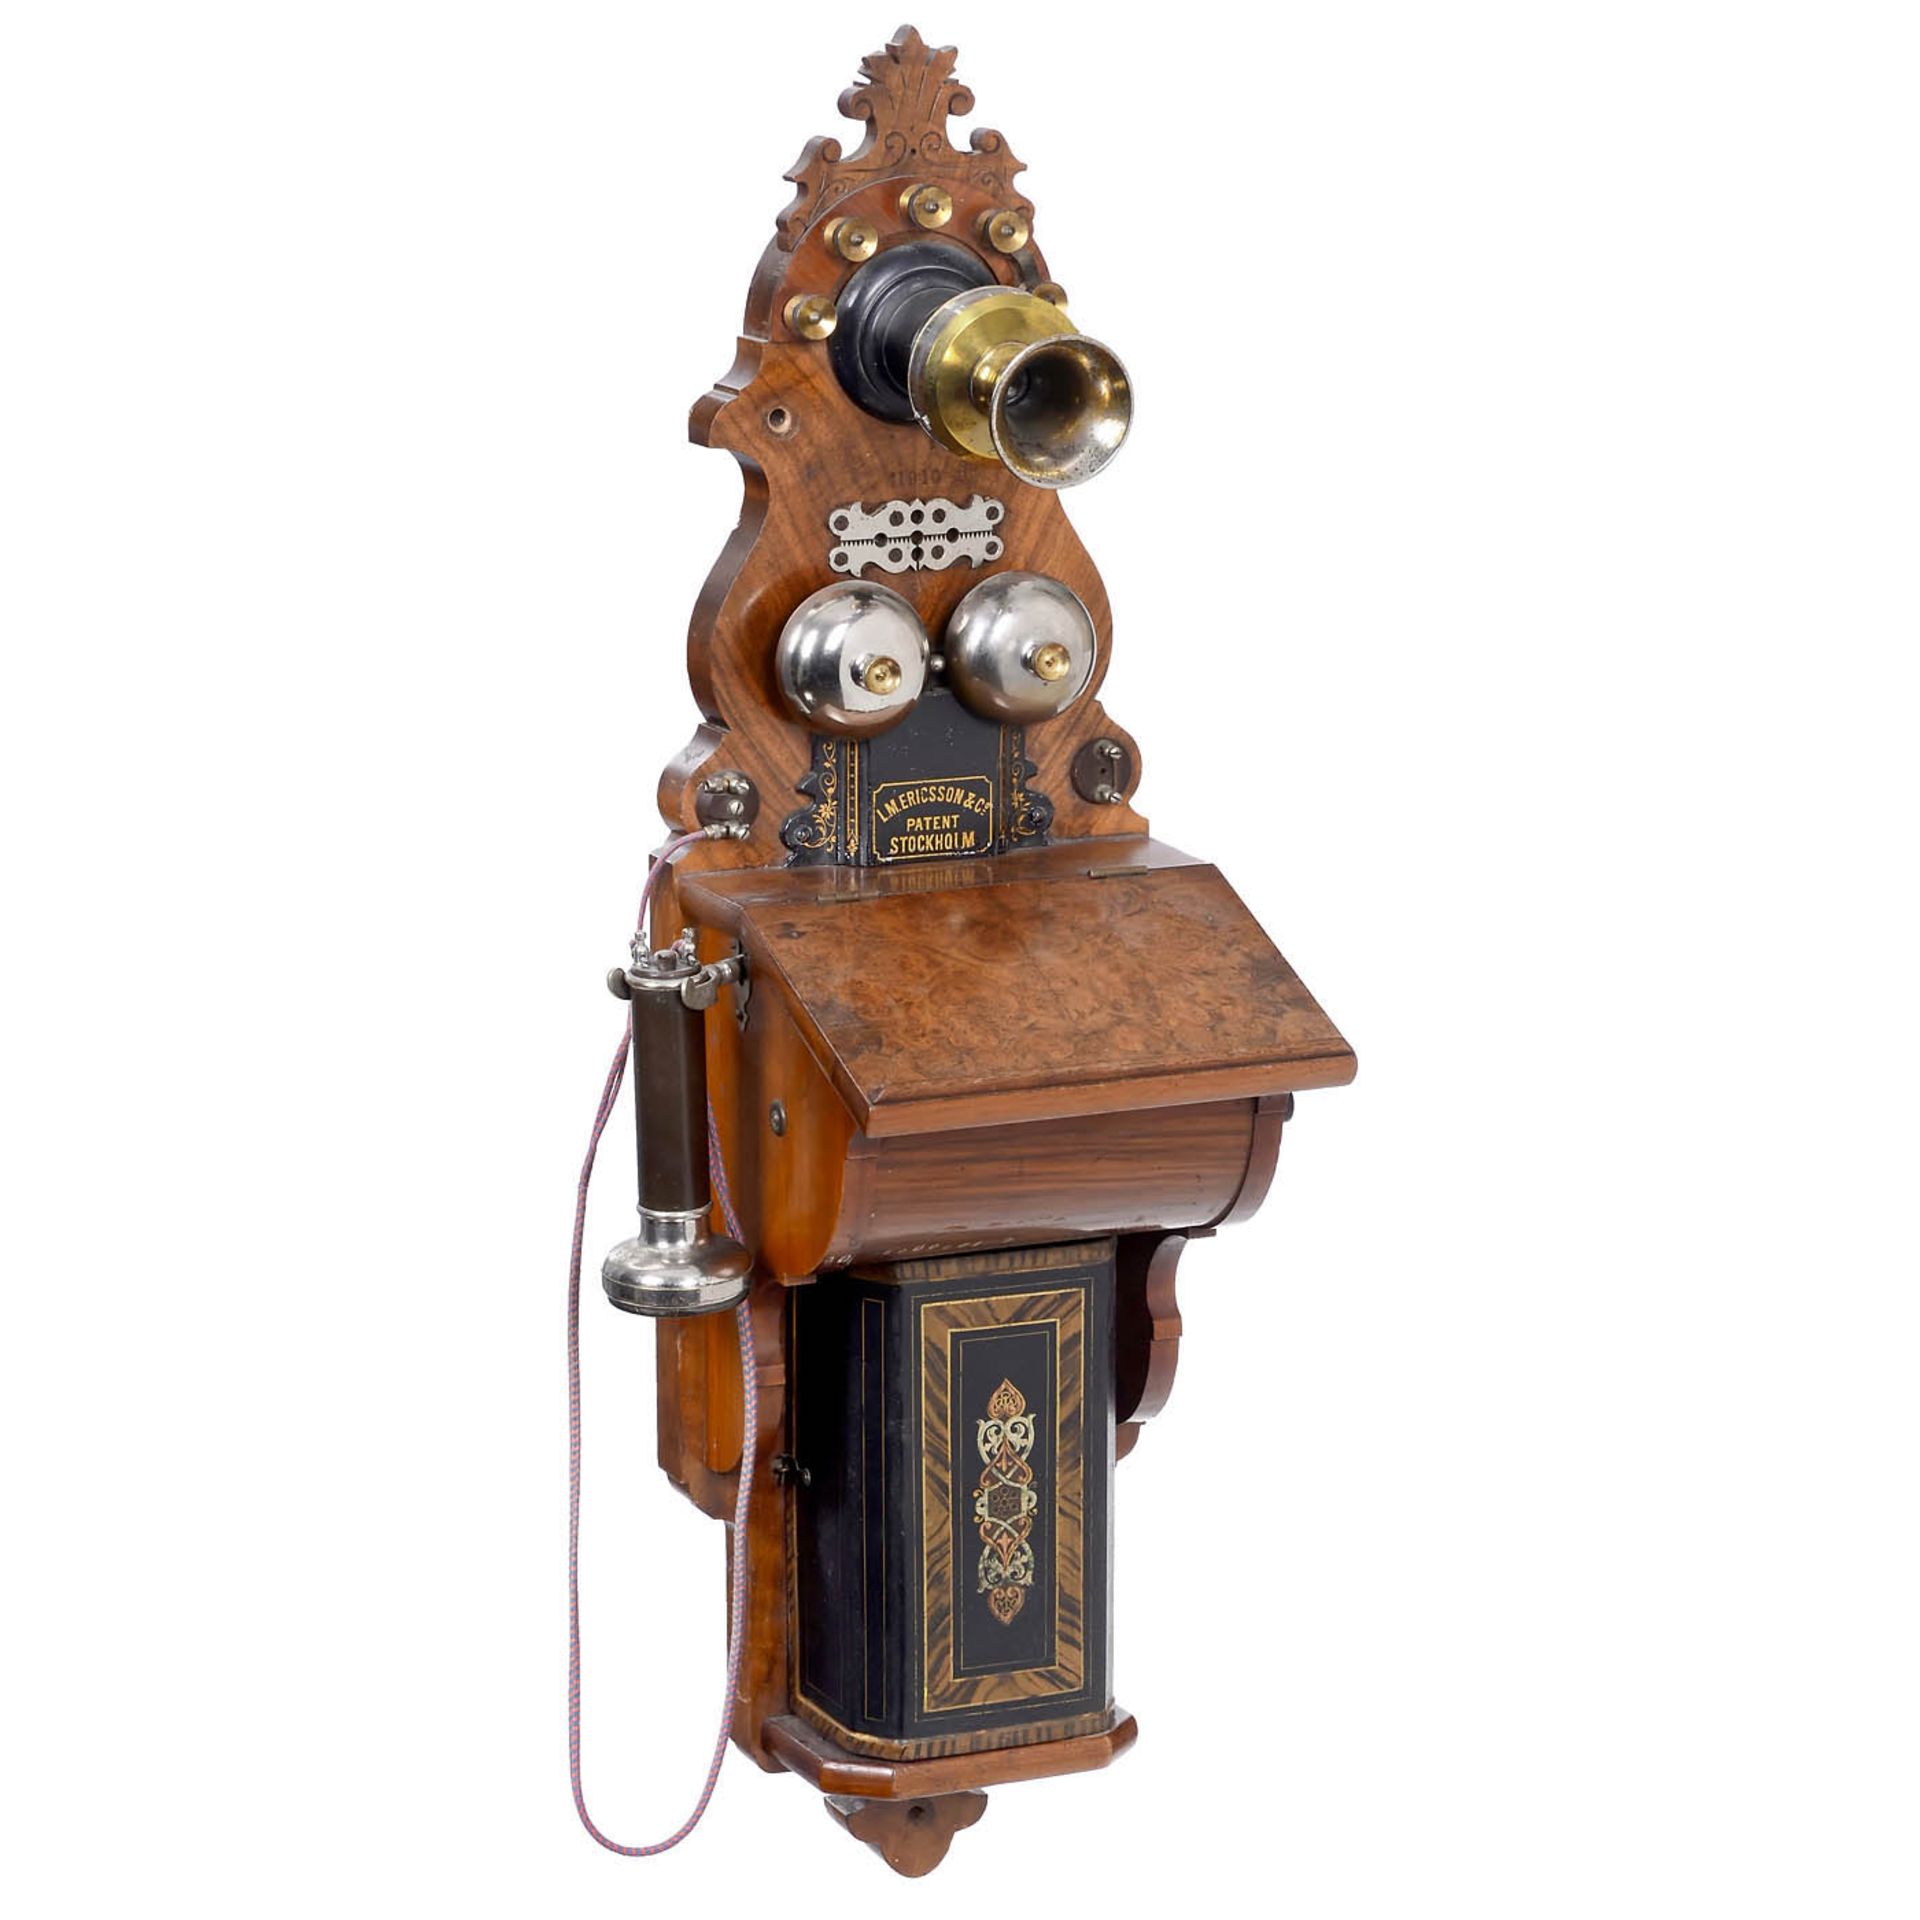 Early Wall Telephone by L.M. Ericsson, 1890 onwards - Image 2 of 2